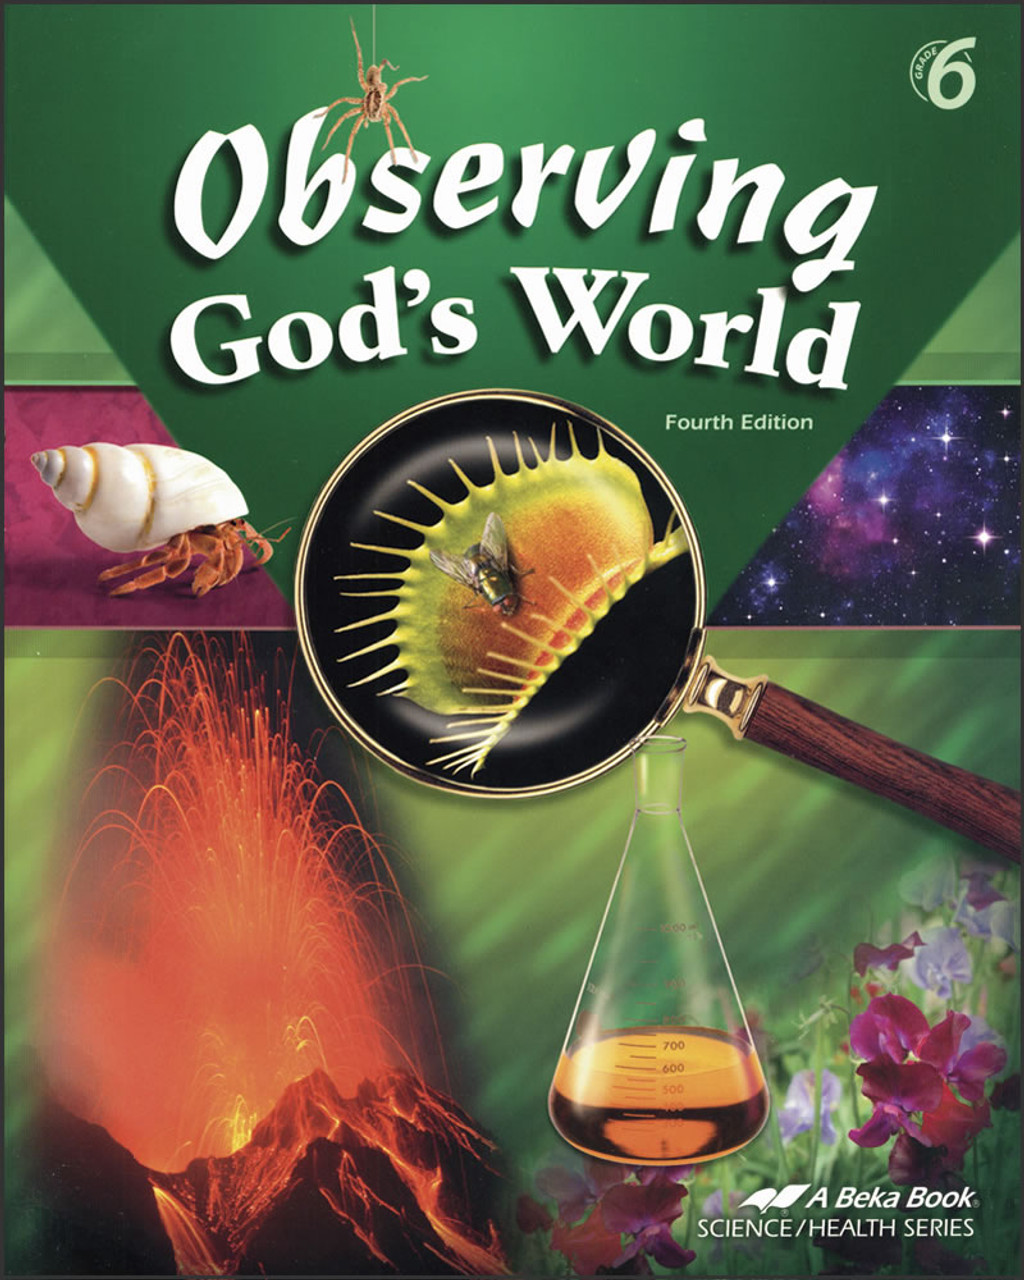 Observing God's World, 4th edition